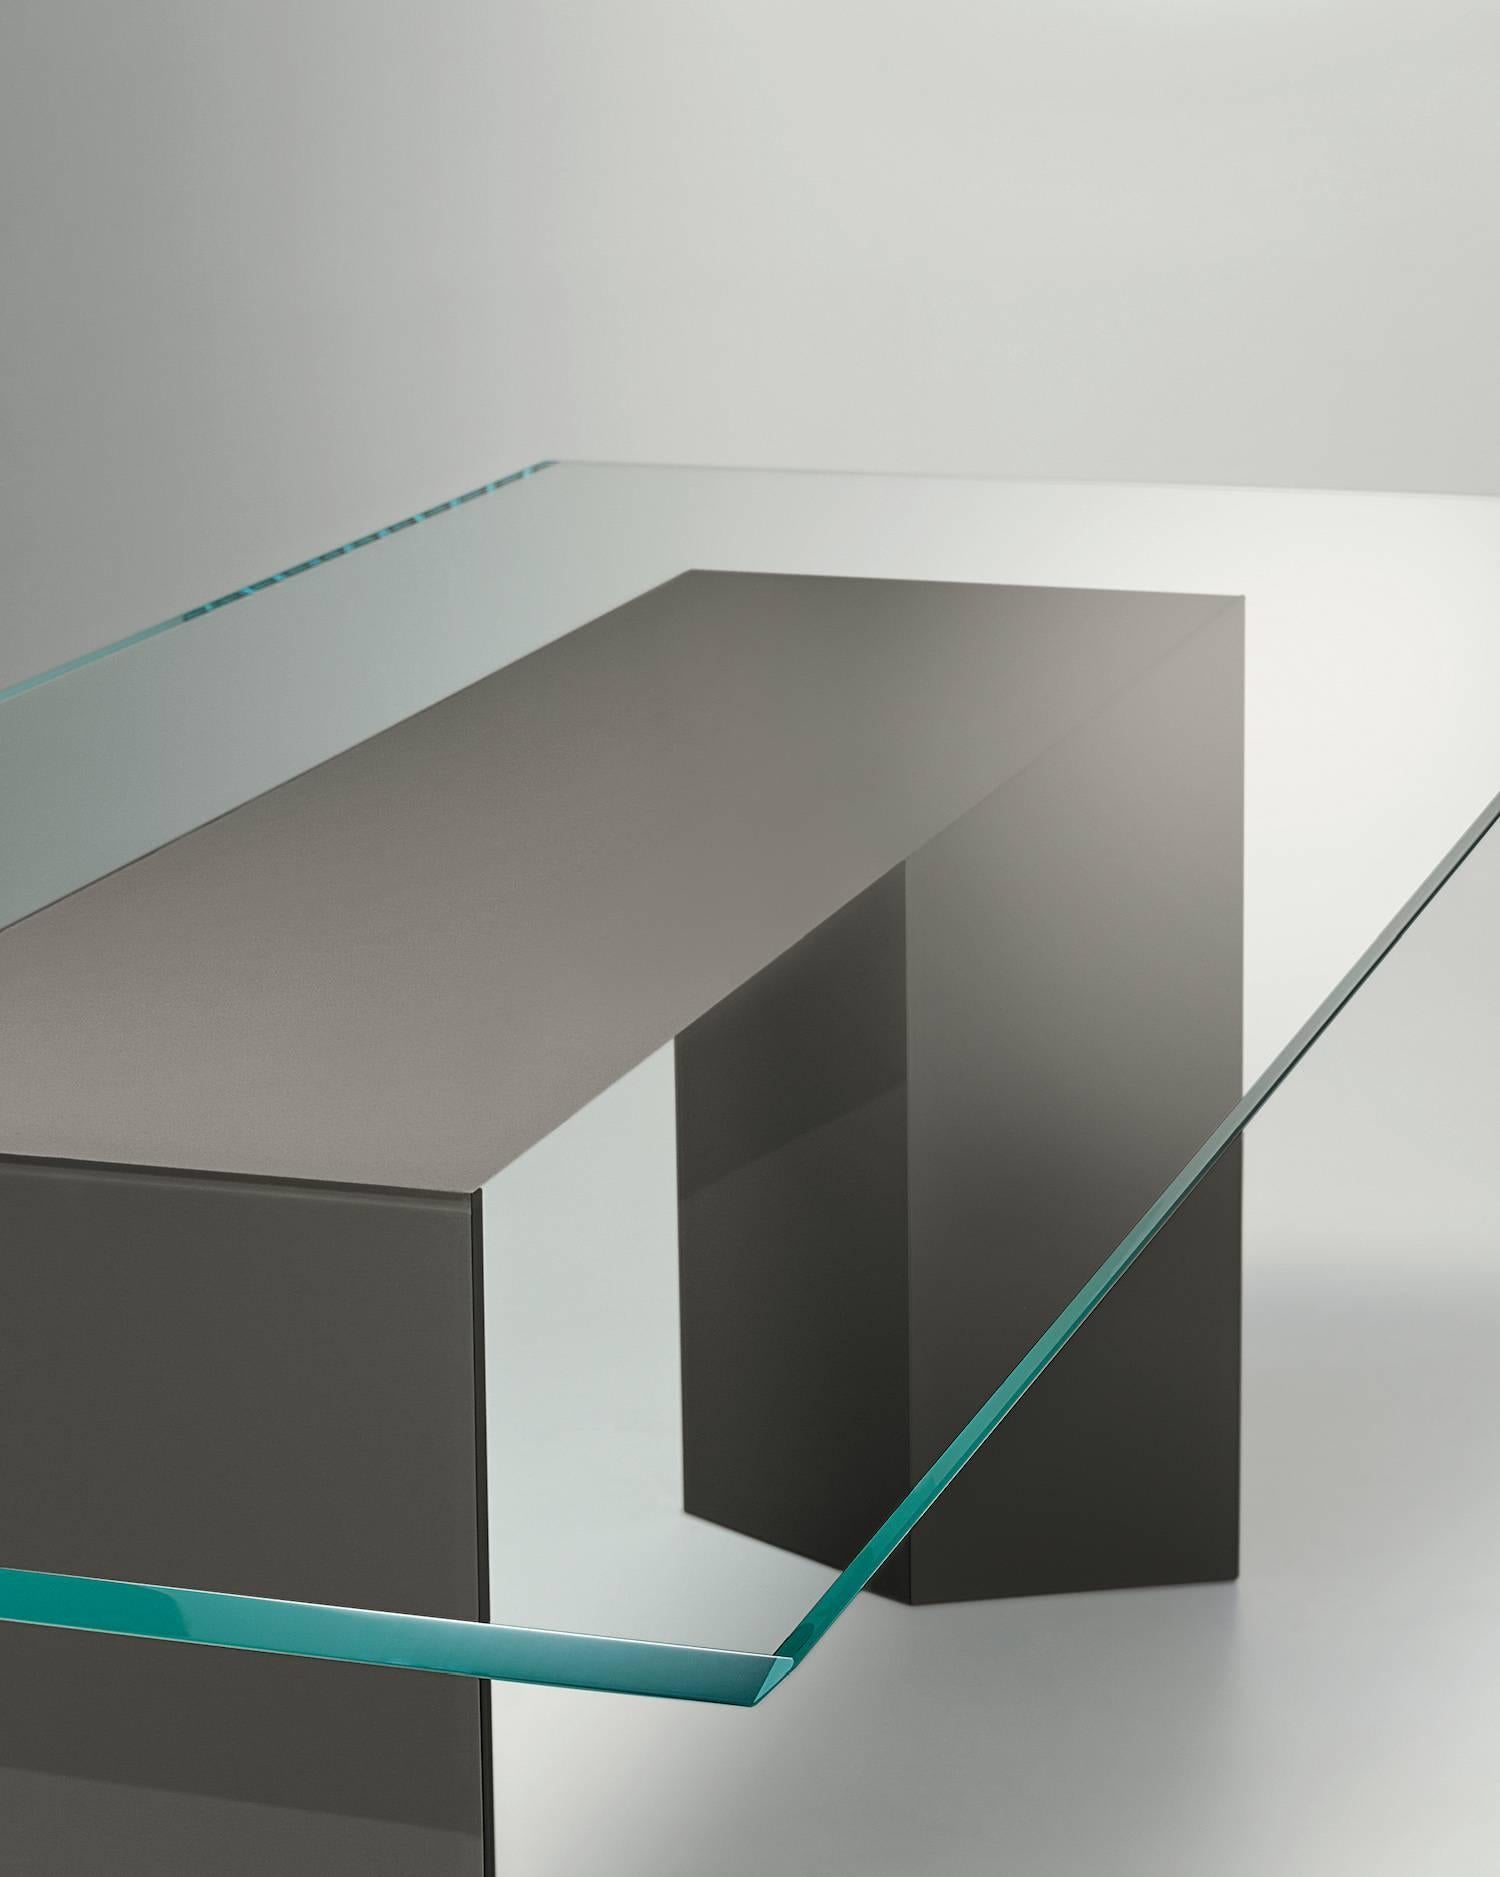 Table with 15 mm extralight glass top, painted only in the middle part as per samples in the bright version. 45° bevelled glass top. Wooden base covered by painted glass as per samples in the bright version. Dolm is suitable for modular compositions